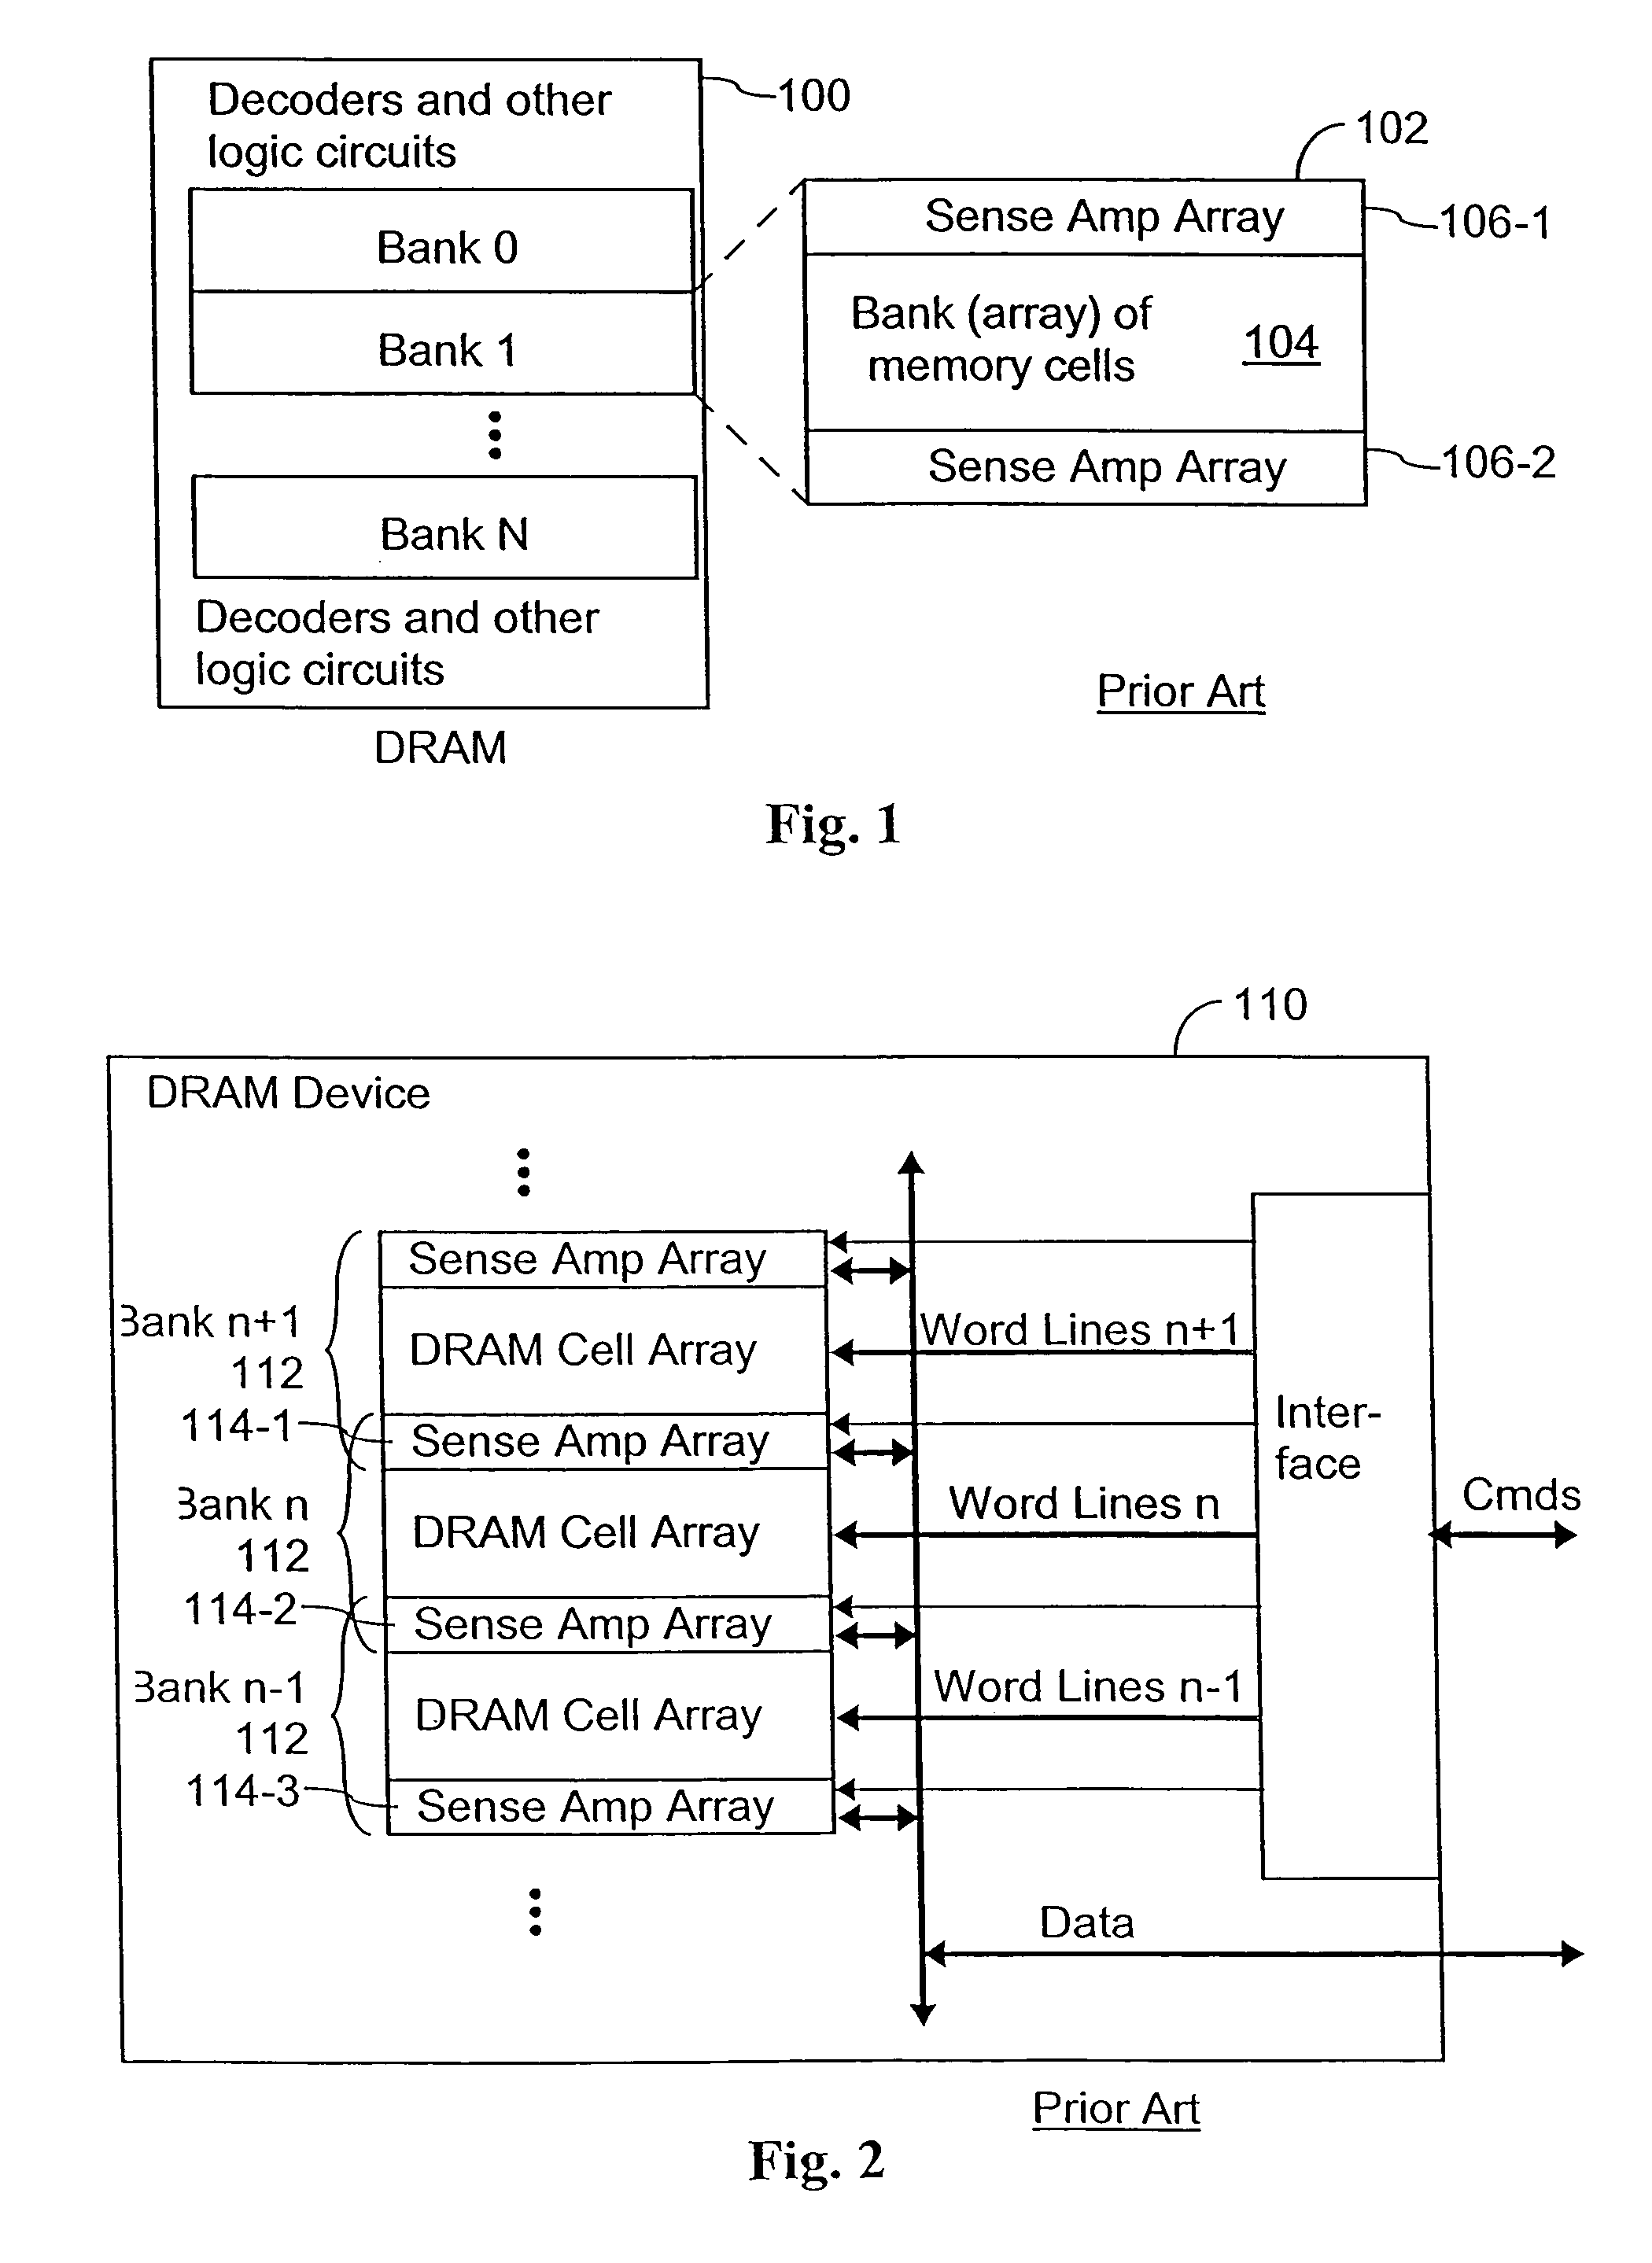 Memory controller with power management logic